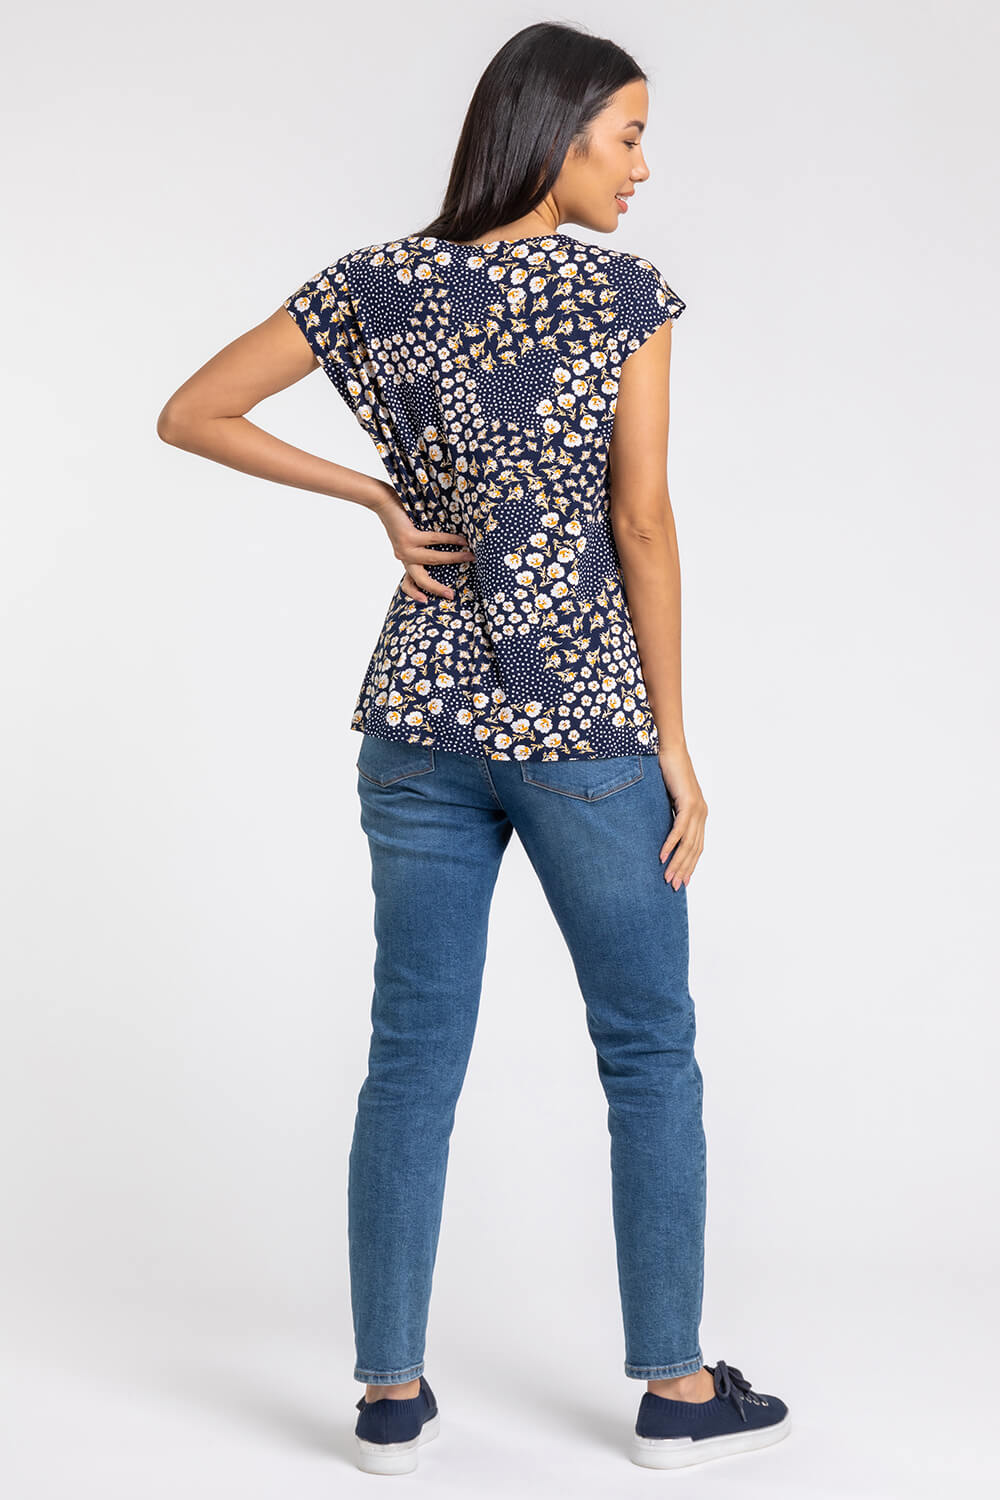 Navy  Floral Tile Print Button Detail Top, Image 2 of 4